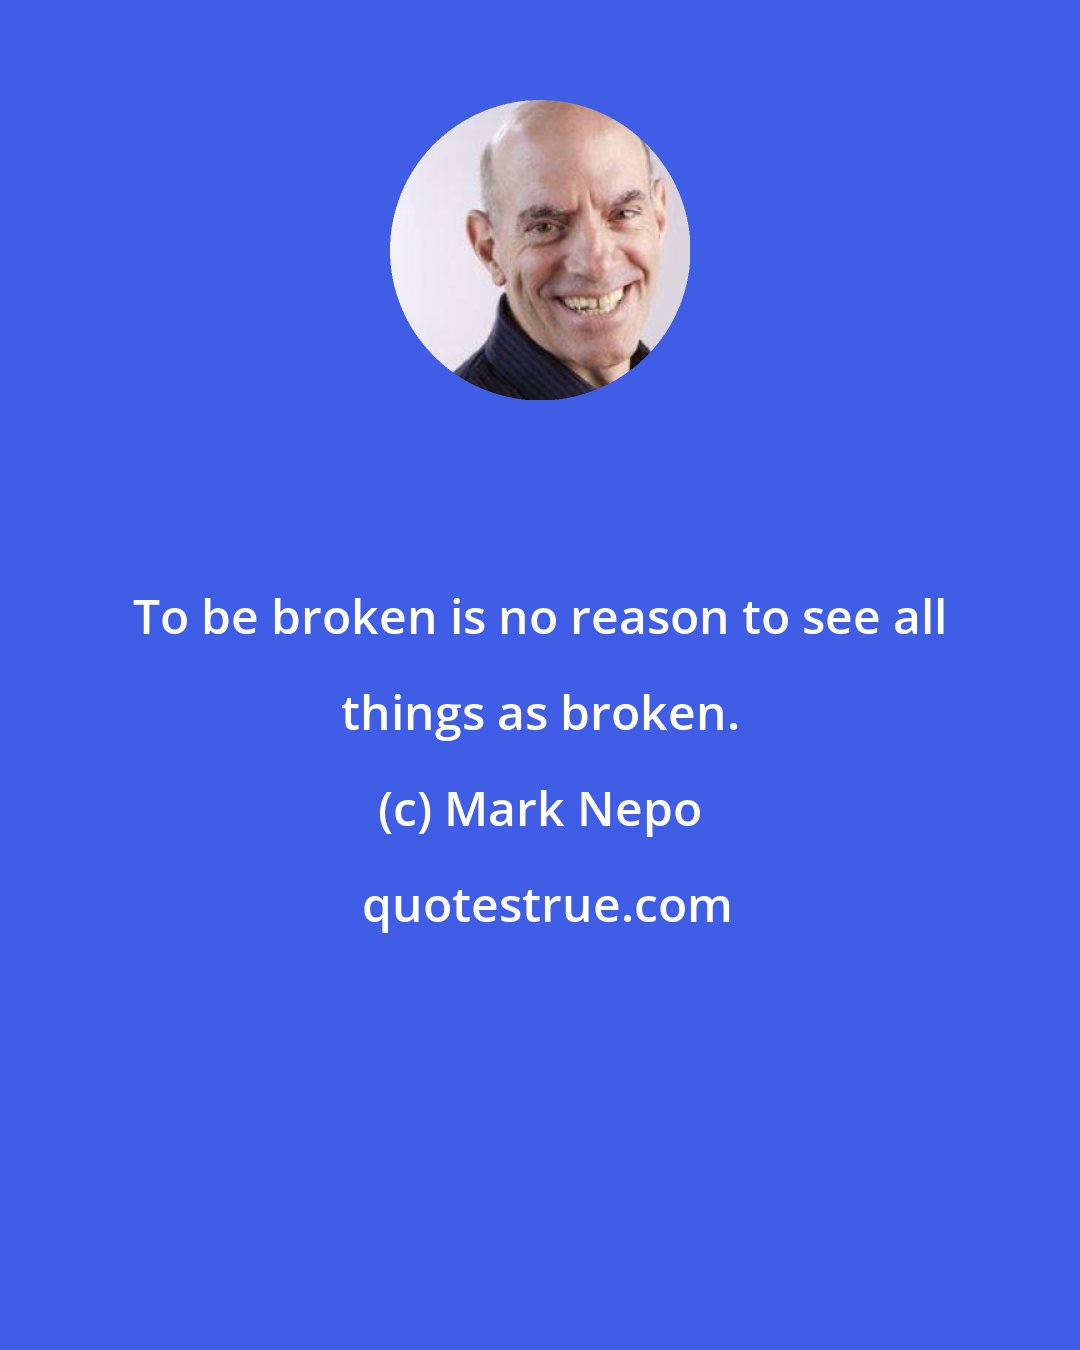 Mark Nepo: To be broken is no reason to see all things as broken.